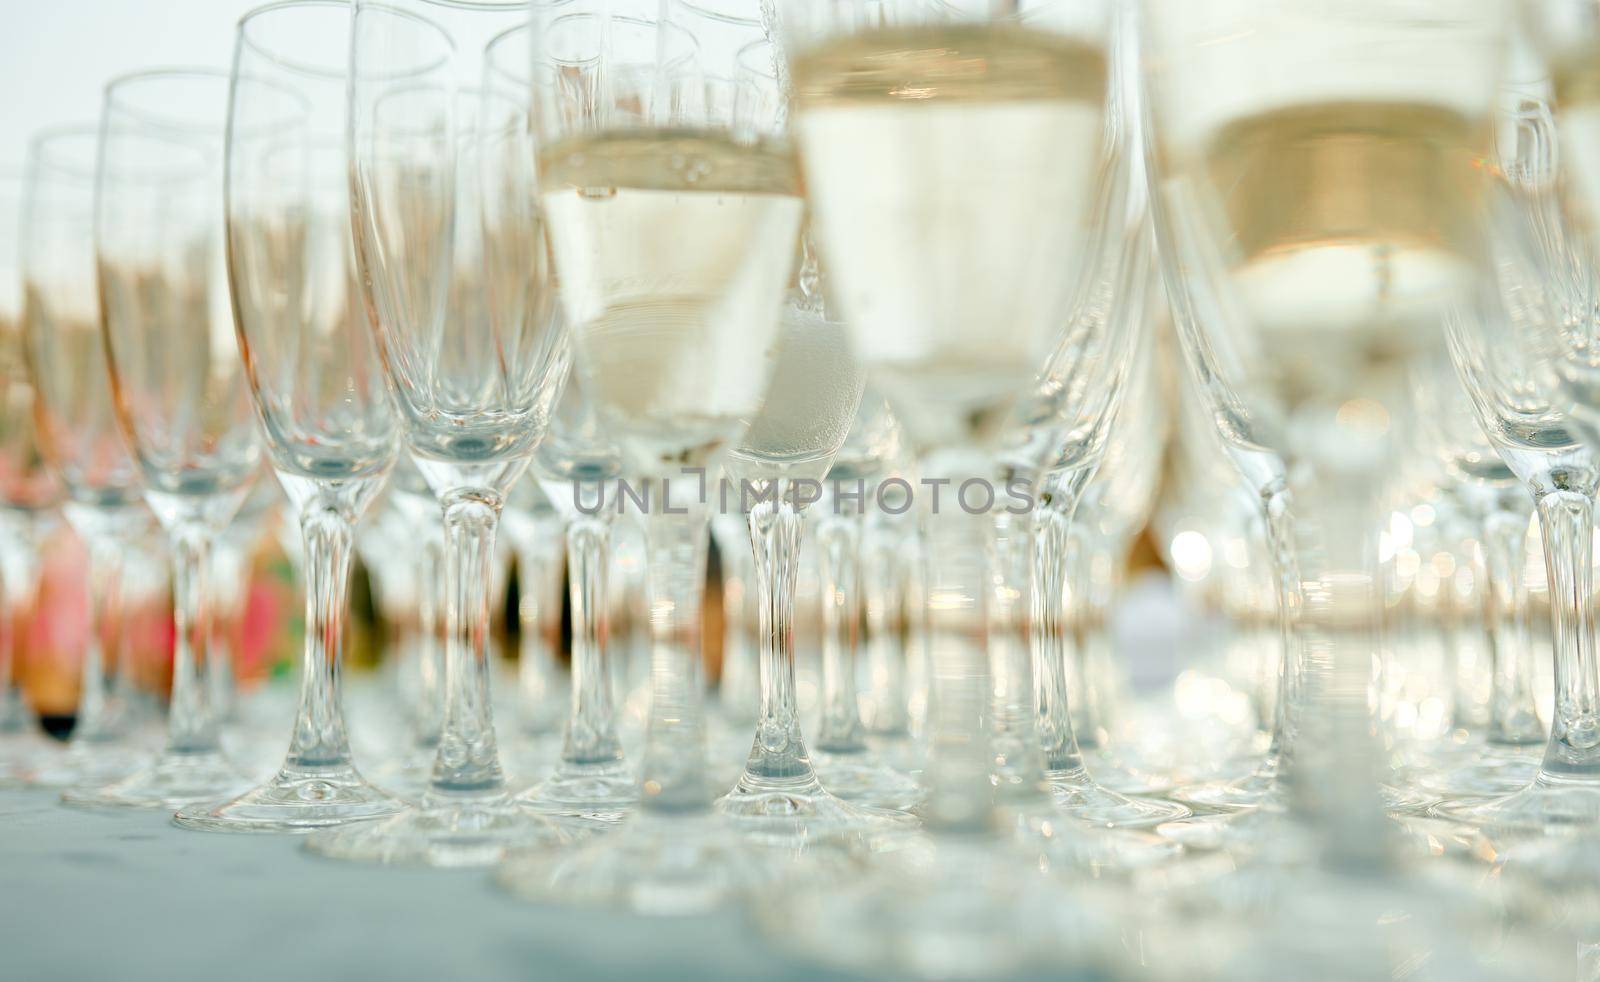 A row of wine glasses on a table by AntonIlchanka